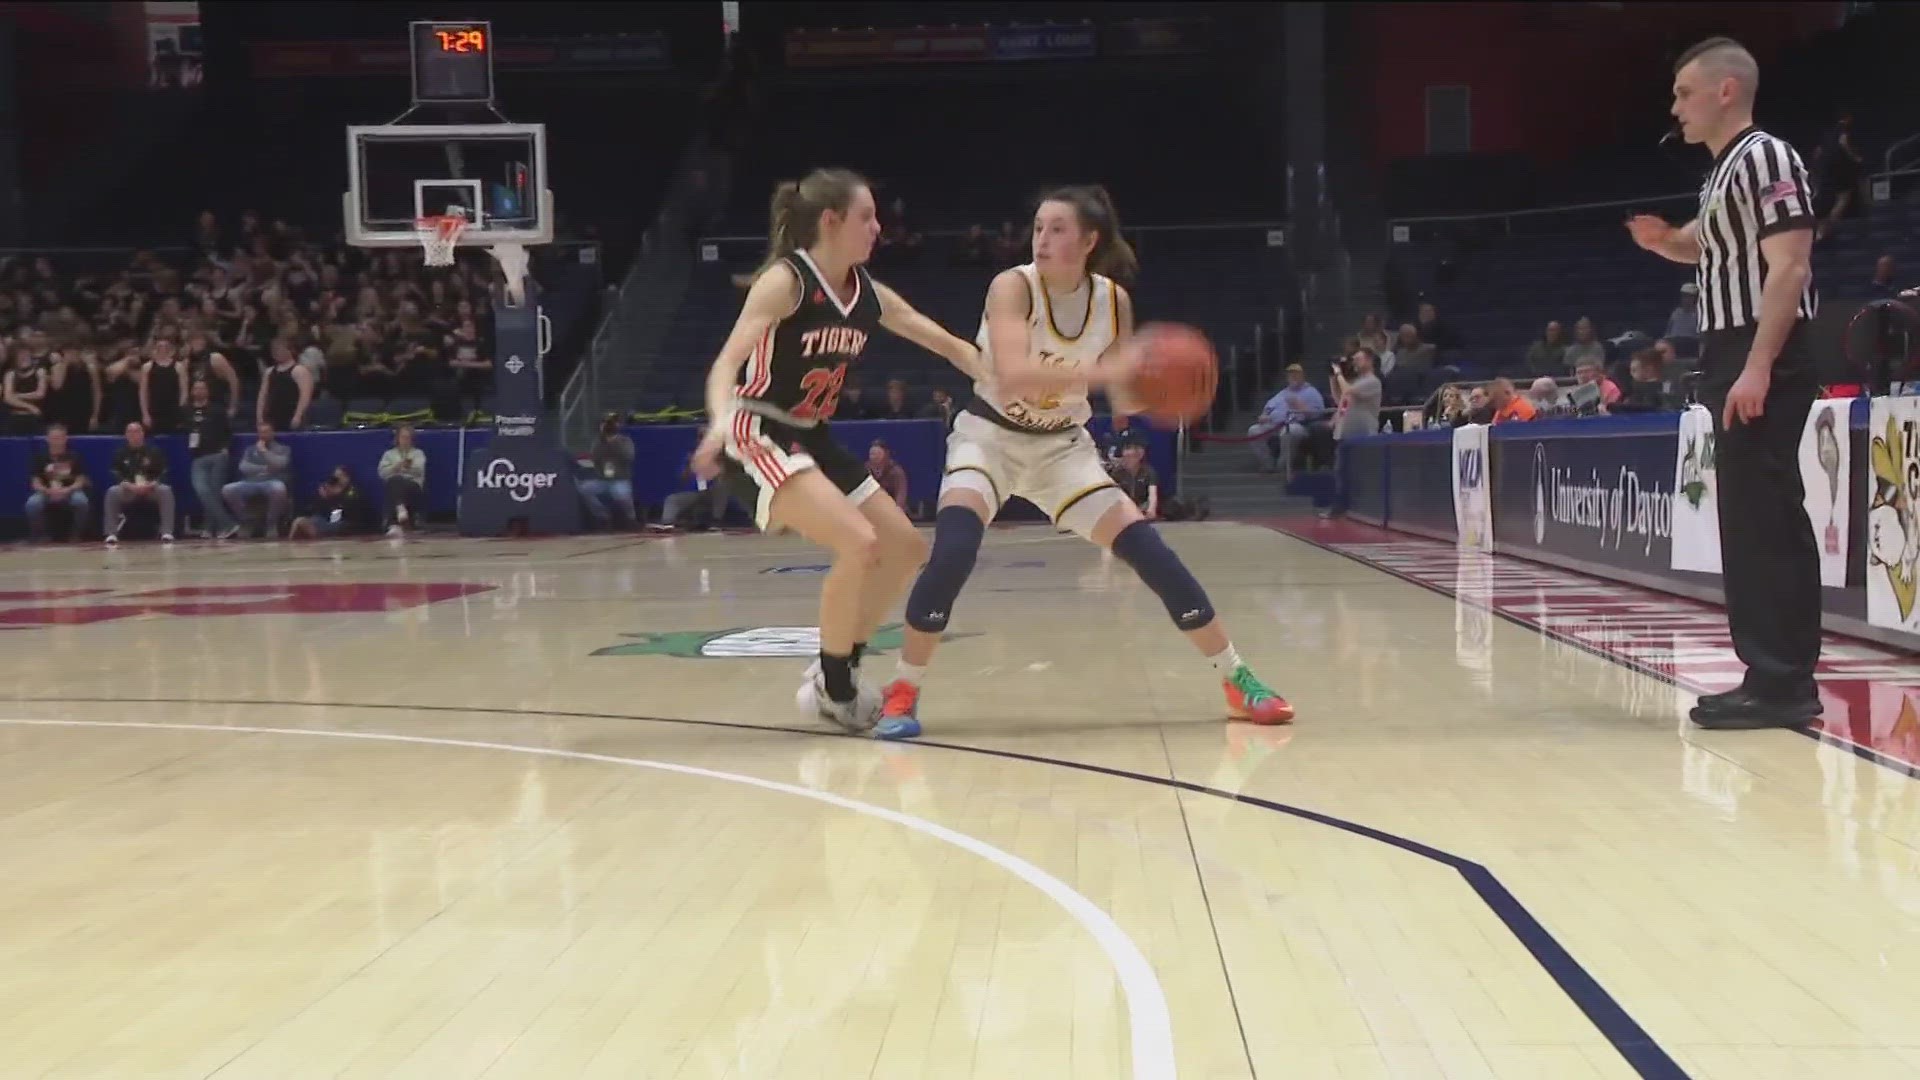 Toledo Christian beat New Middletown Springfield 57-29. The girls team will face New Madison Tri-Village on Saturday in the Division IV state championship.